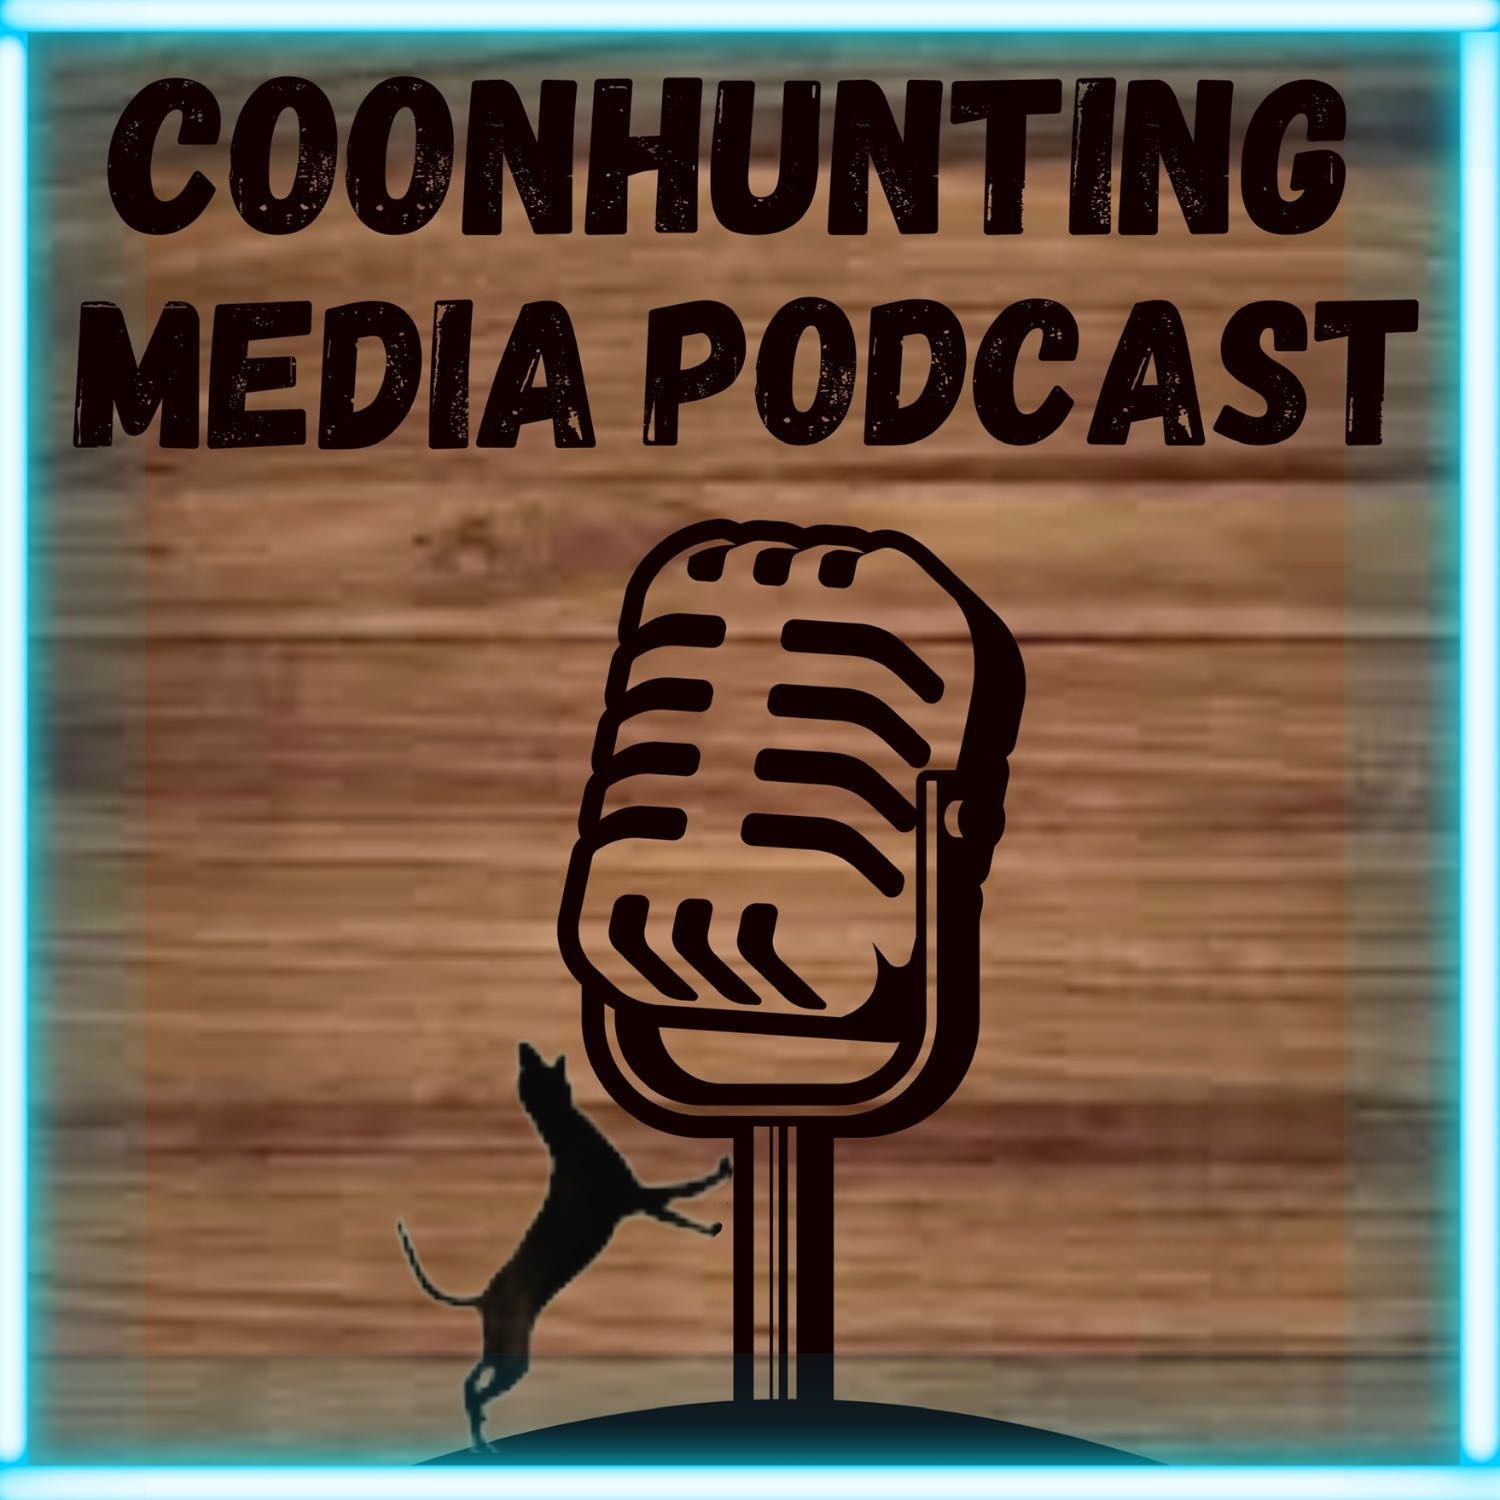 Coon Hunting Media Podcast